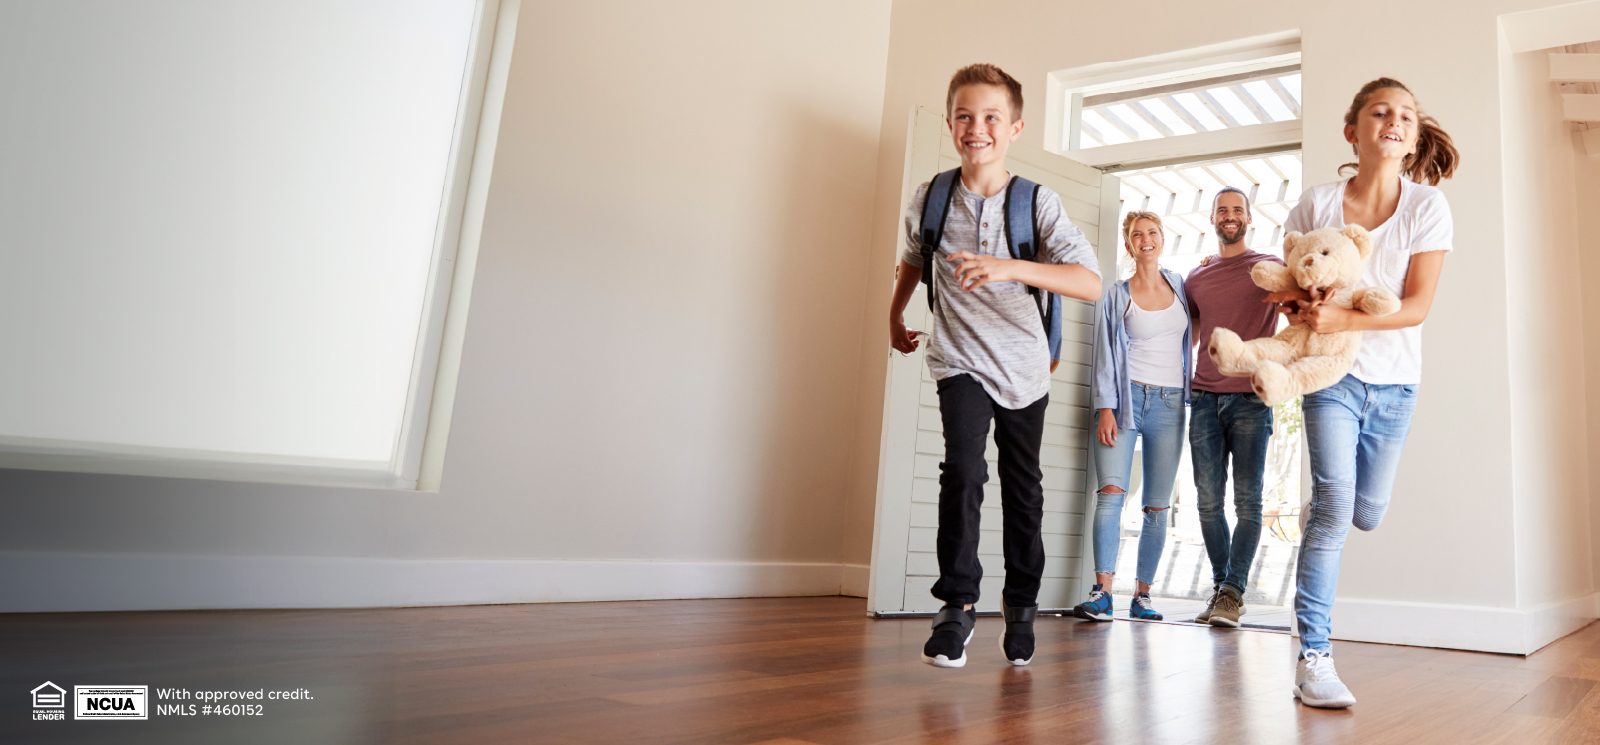 IMAGE: Kids running into new, empty house with parents standing behind smiling